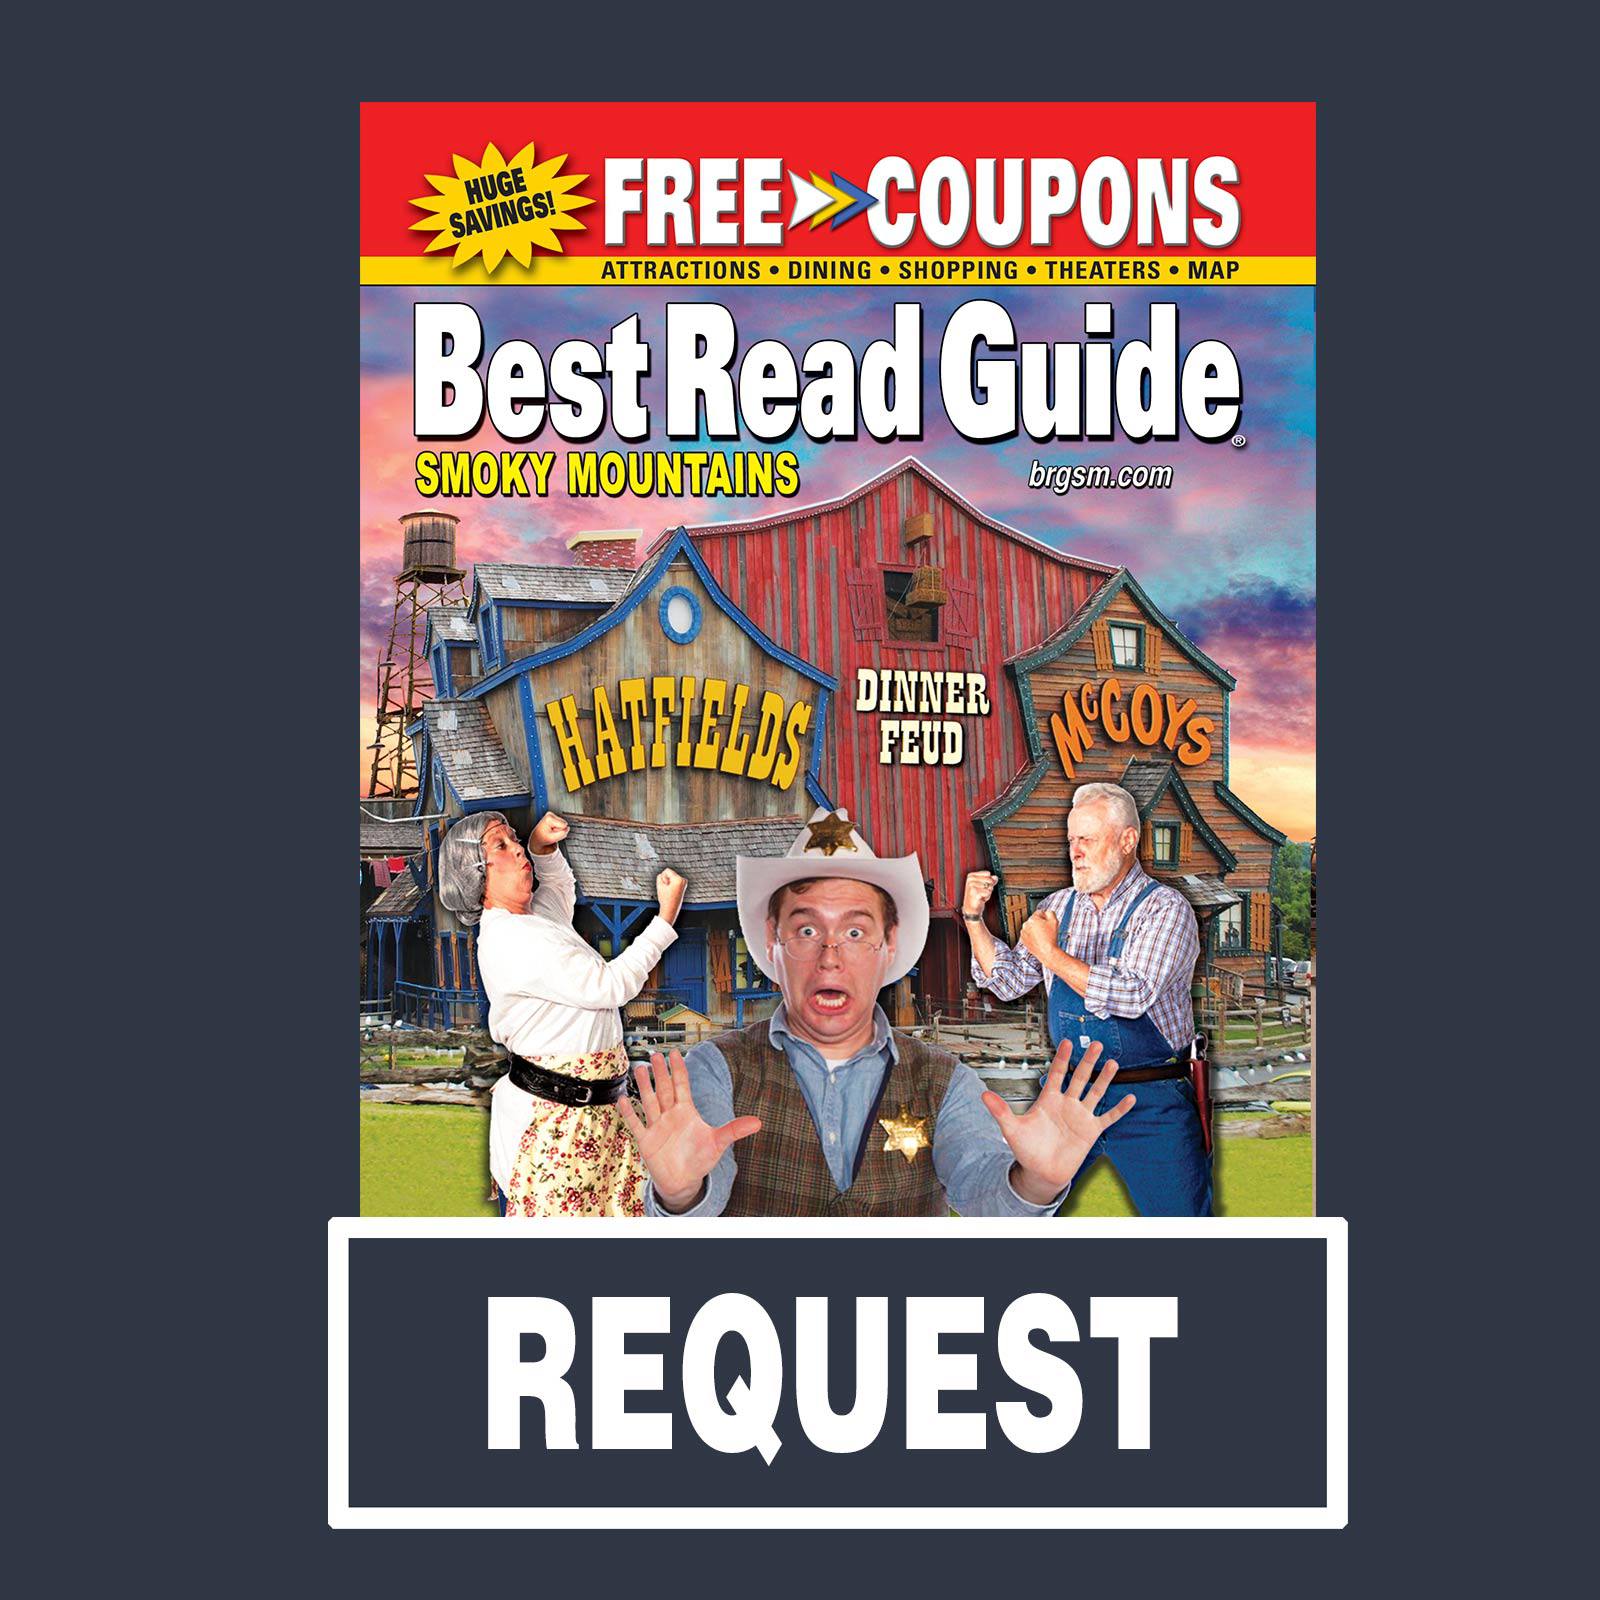 request a guide brg pigeon forge - Contact Best Read Guide - Pigeon Forge Gatlinburg Smoky Mountains